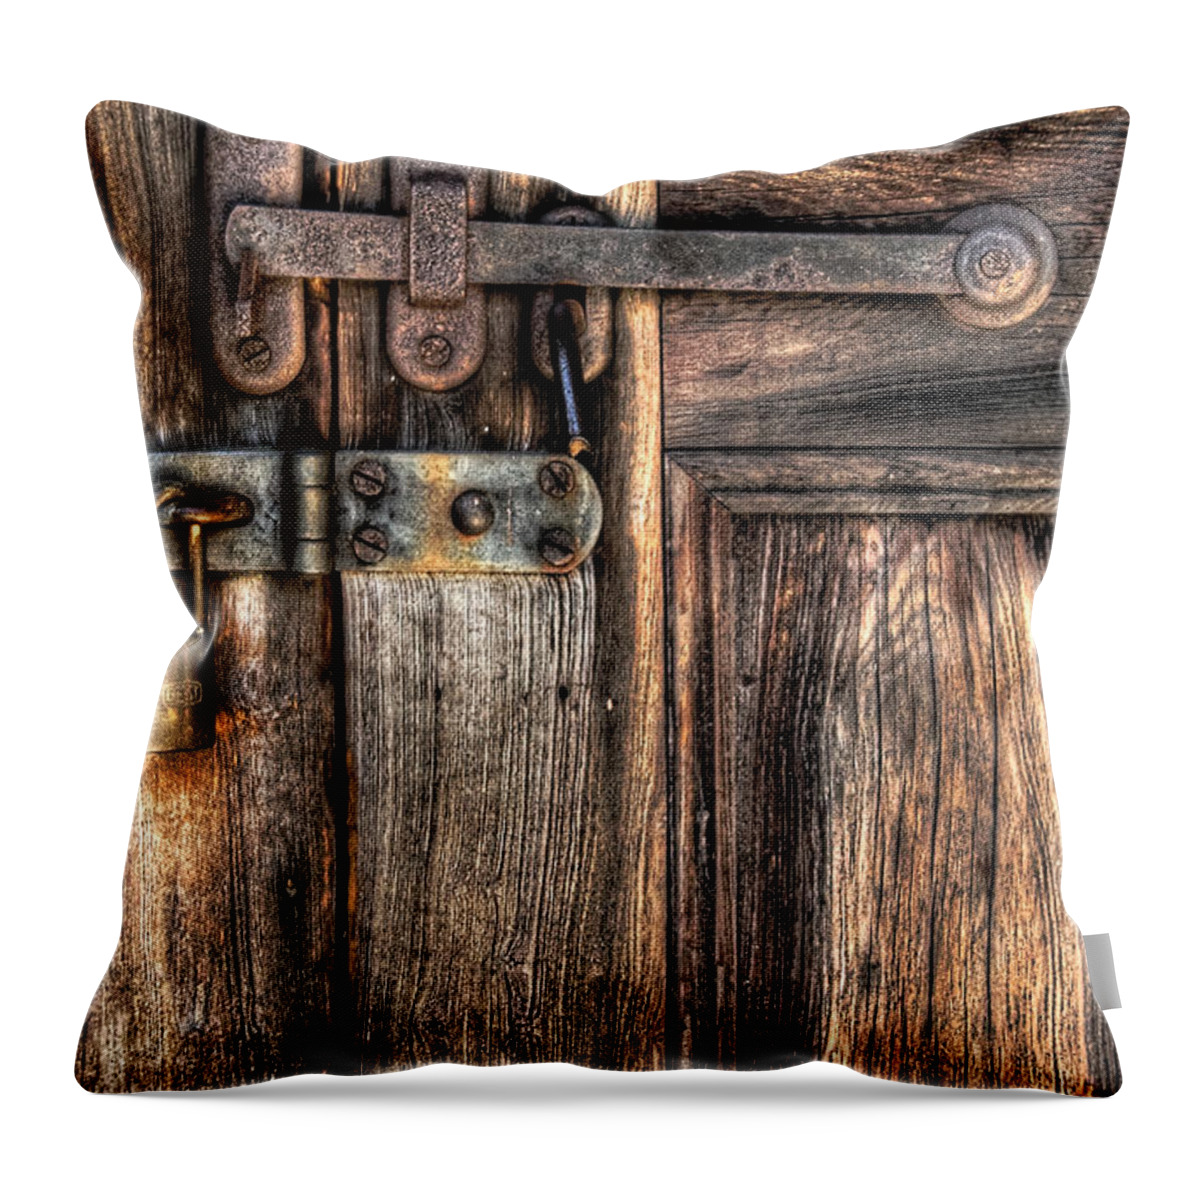 Savad Throw Pillow featuring the photograph Door - The Latch by Mike Savad